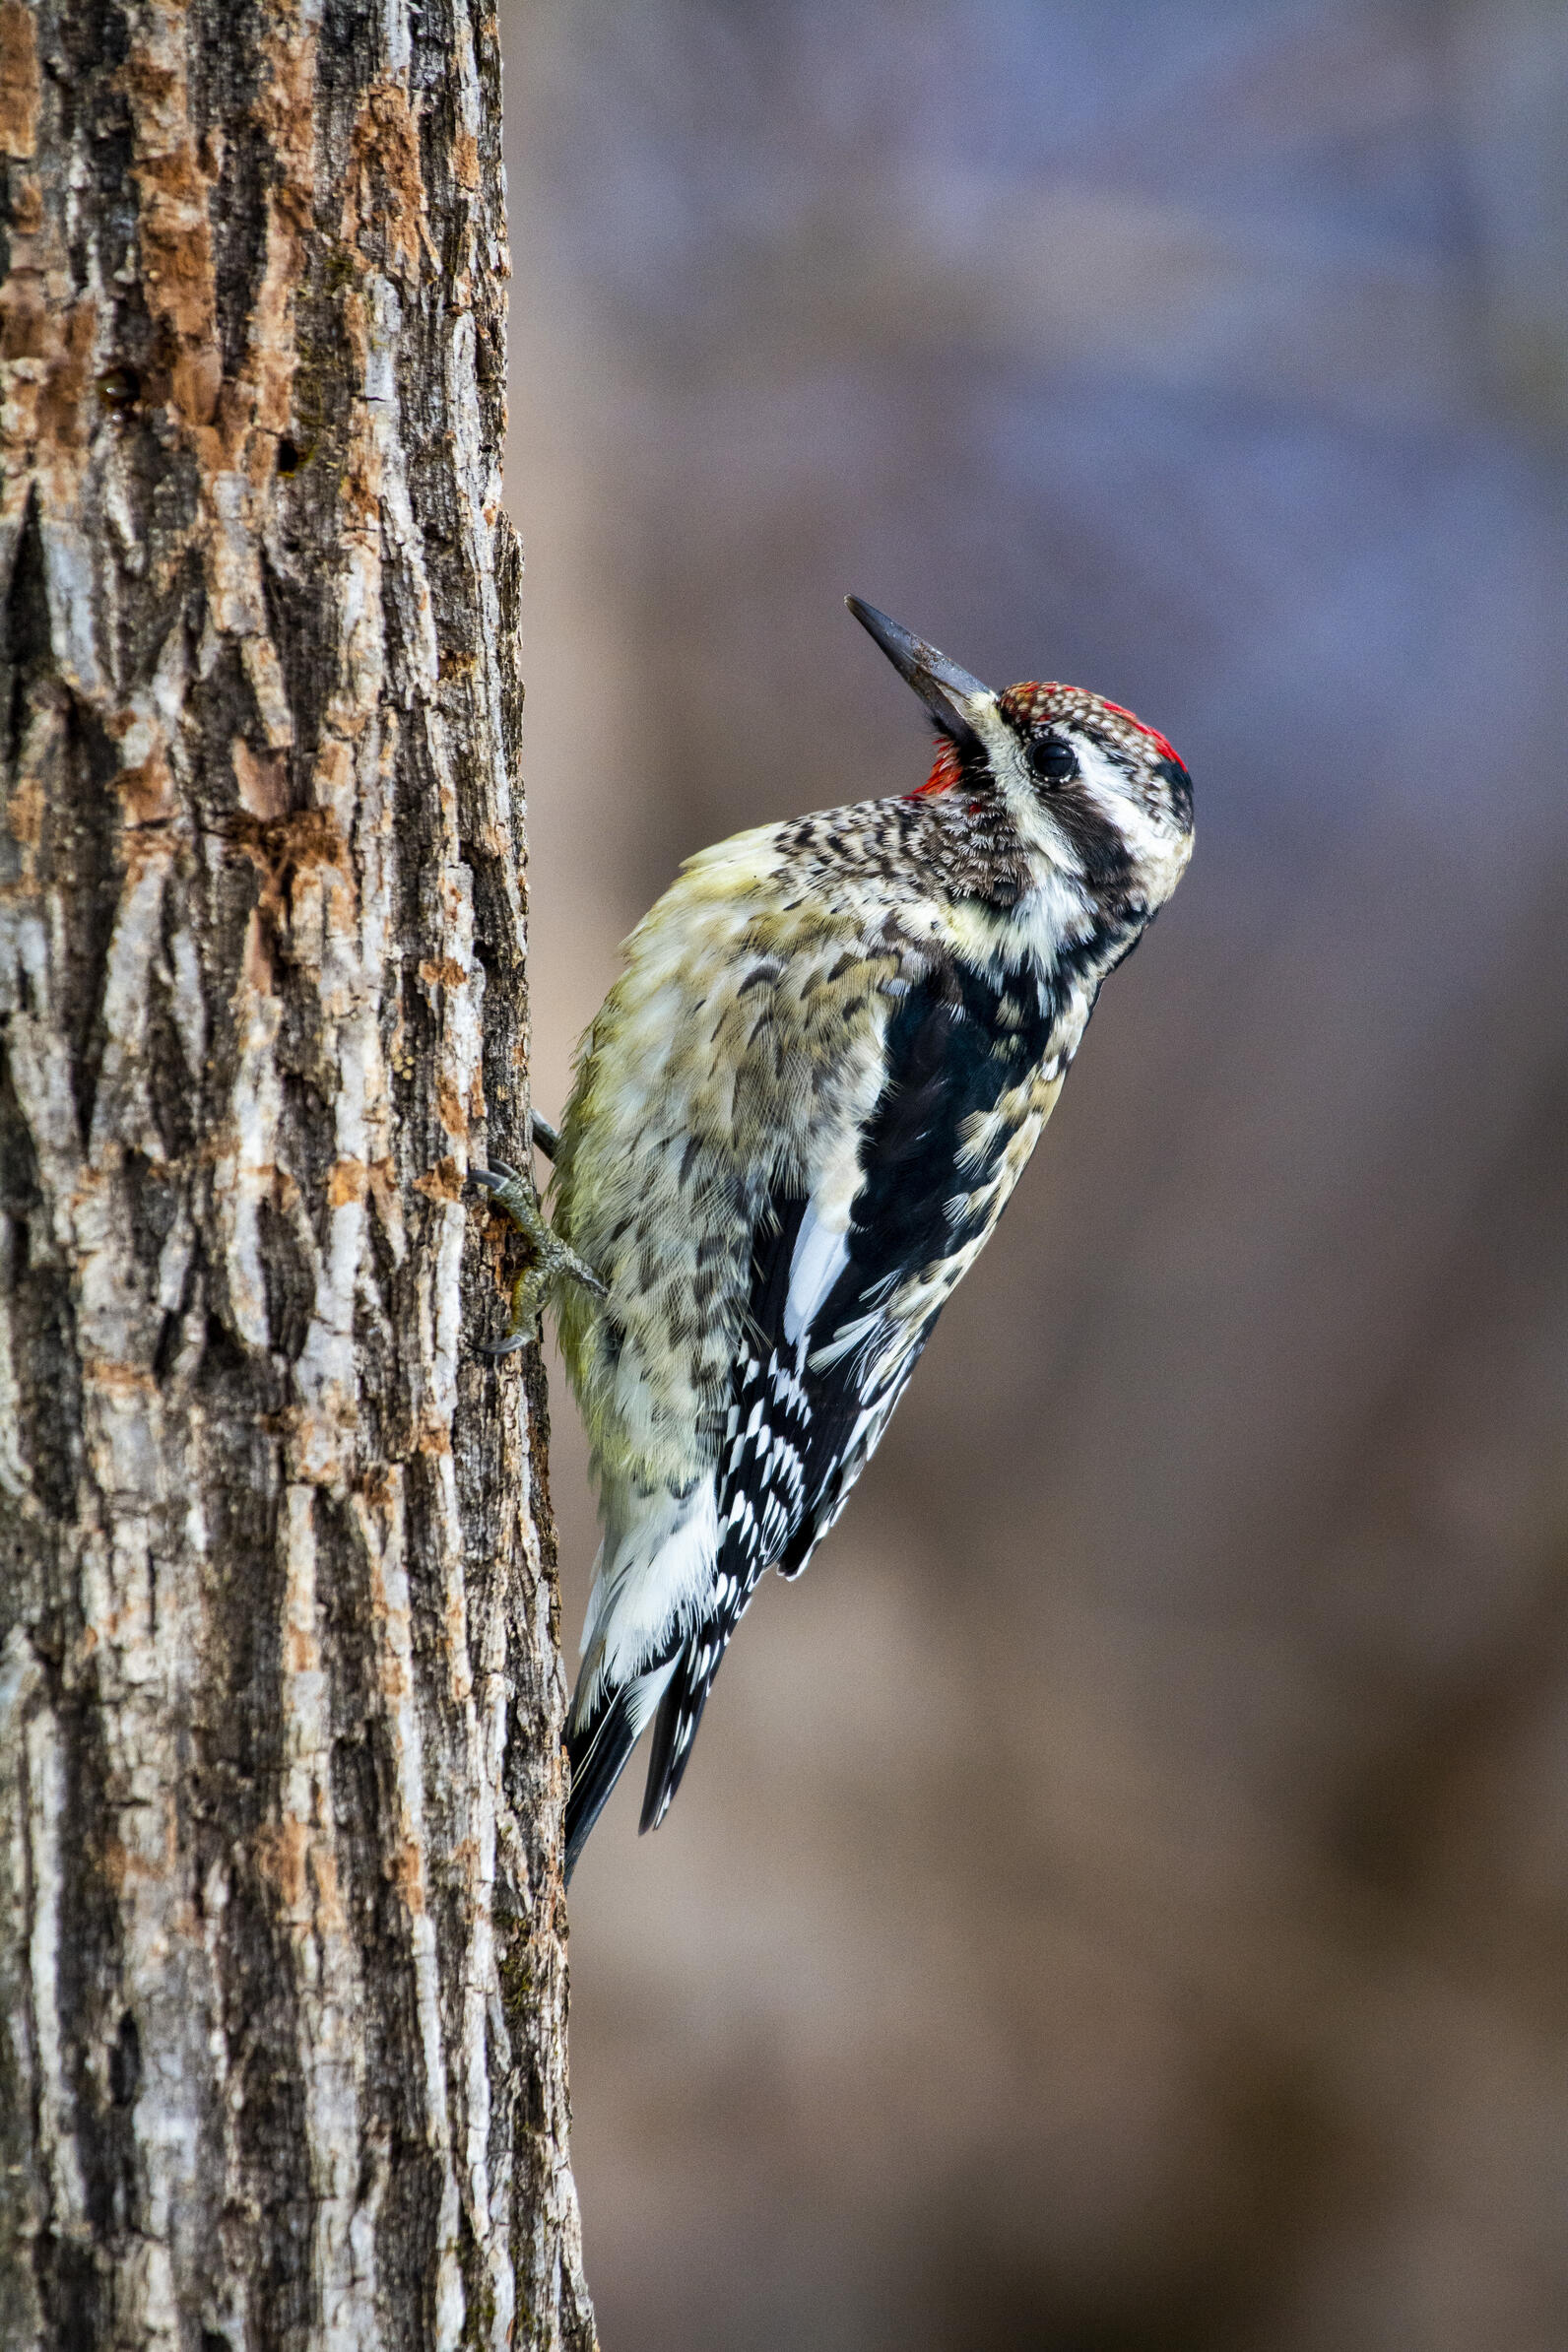 Yellow-bellied Sapsucker perched vertically on a tree.